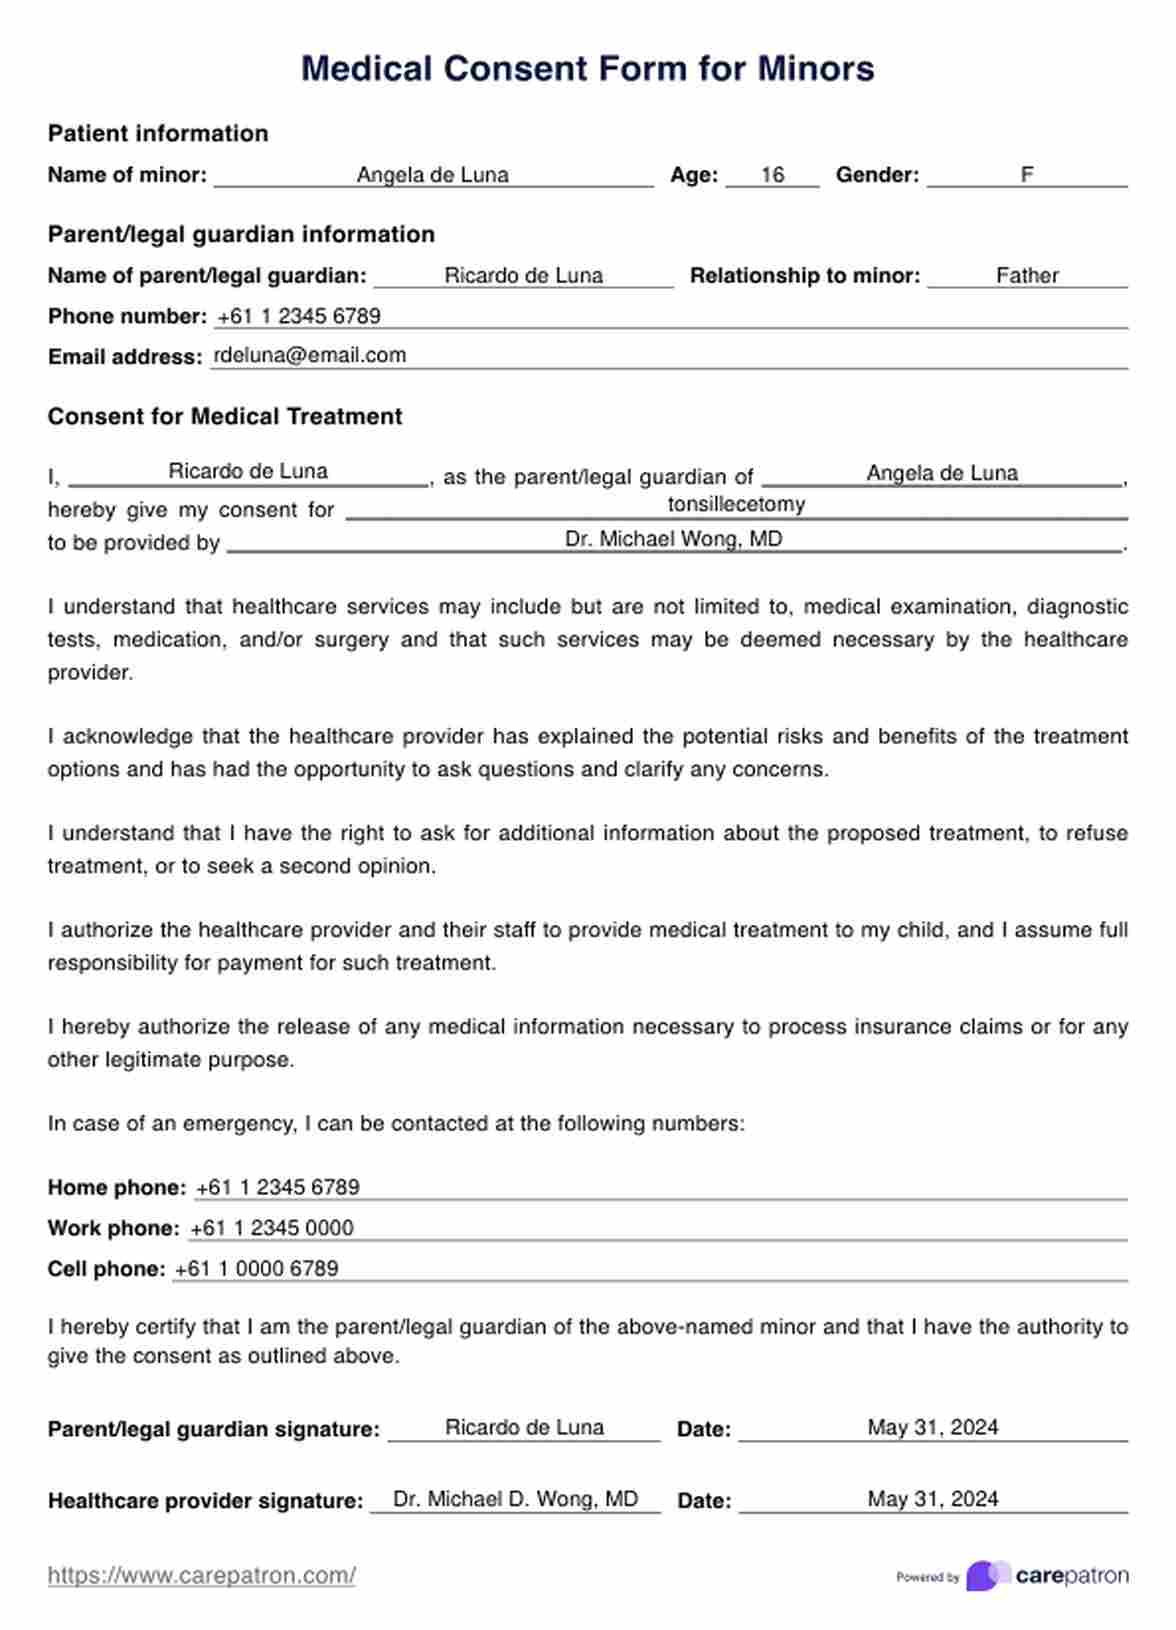 Medical Consent Form For Minor PDF Example